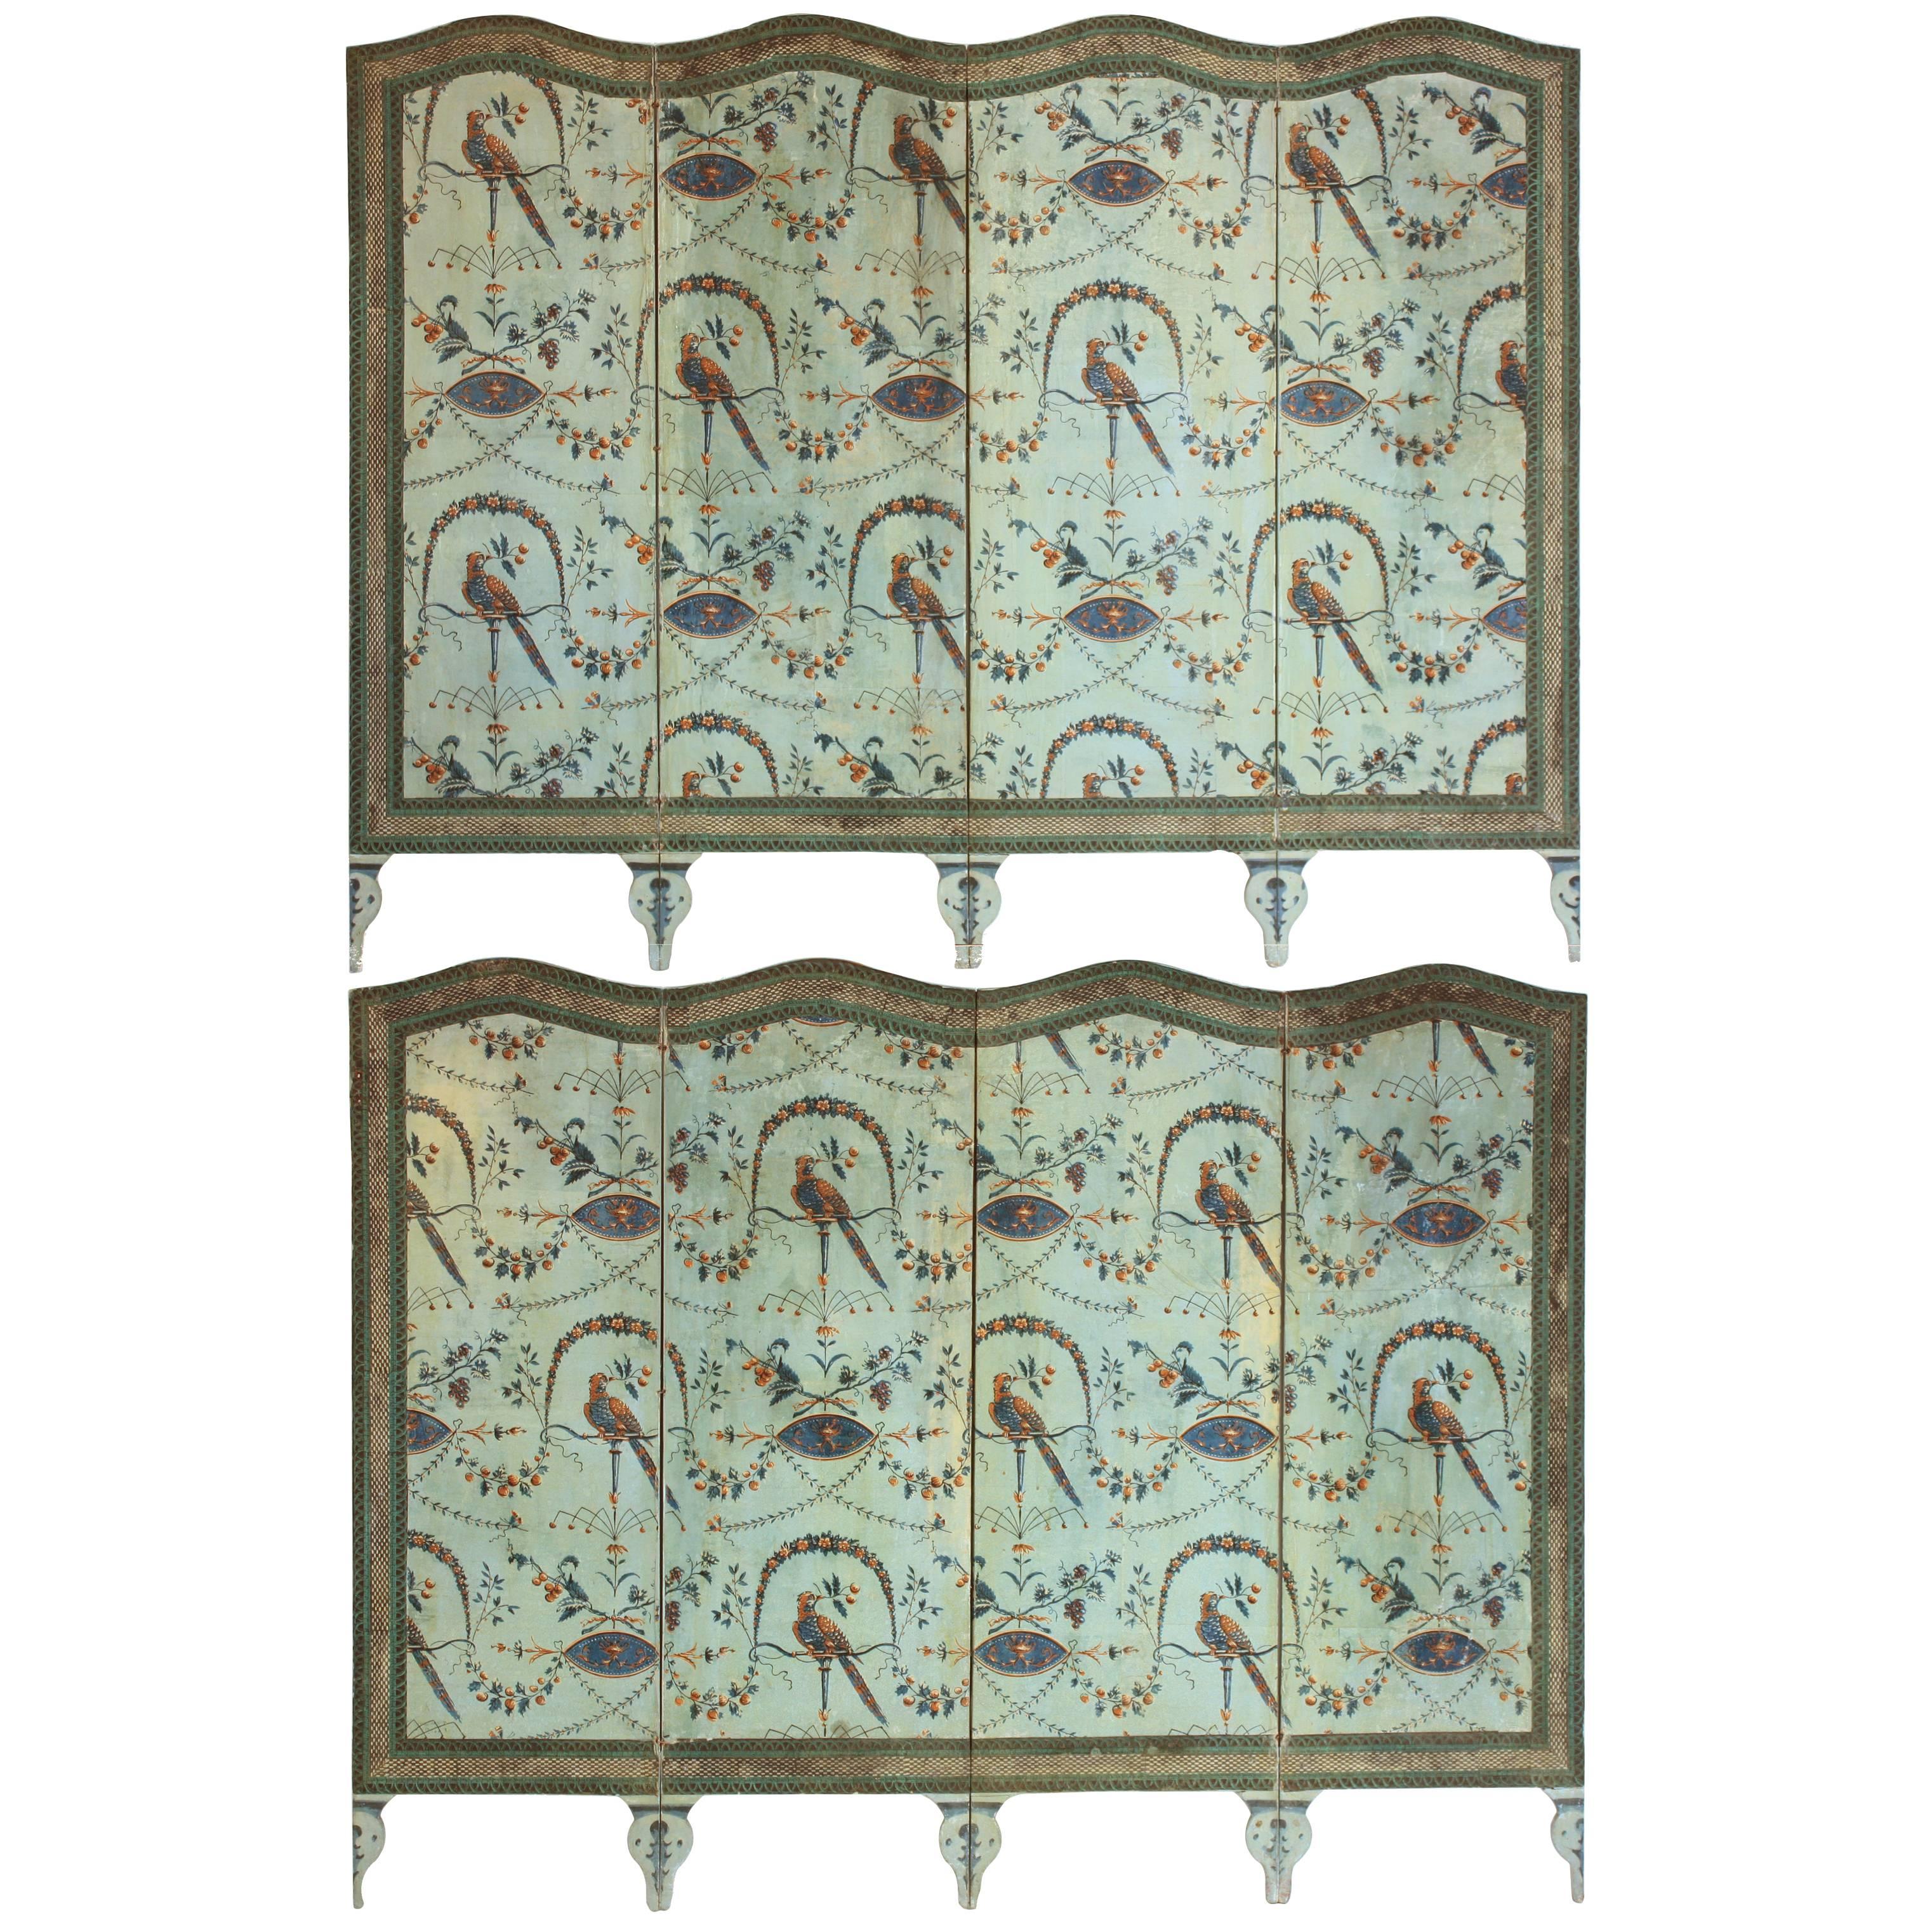 A French four-panel wallpaper screen, depicting birds and foliage detail on one side and panels of various fashion motifs on the reverse.  Currently, screen is flat mounted to the wall but it could easily be made to fold and stand